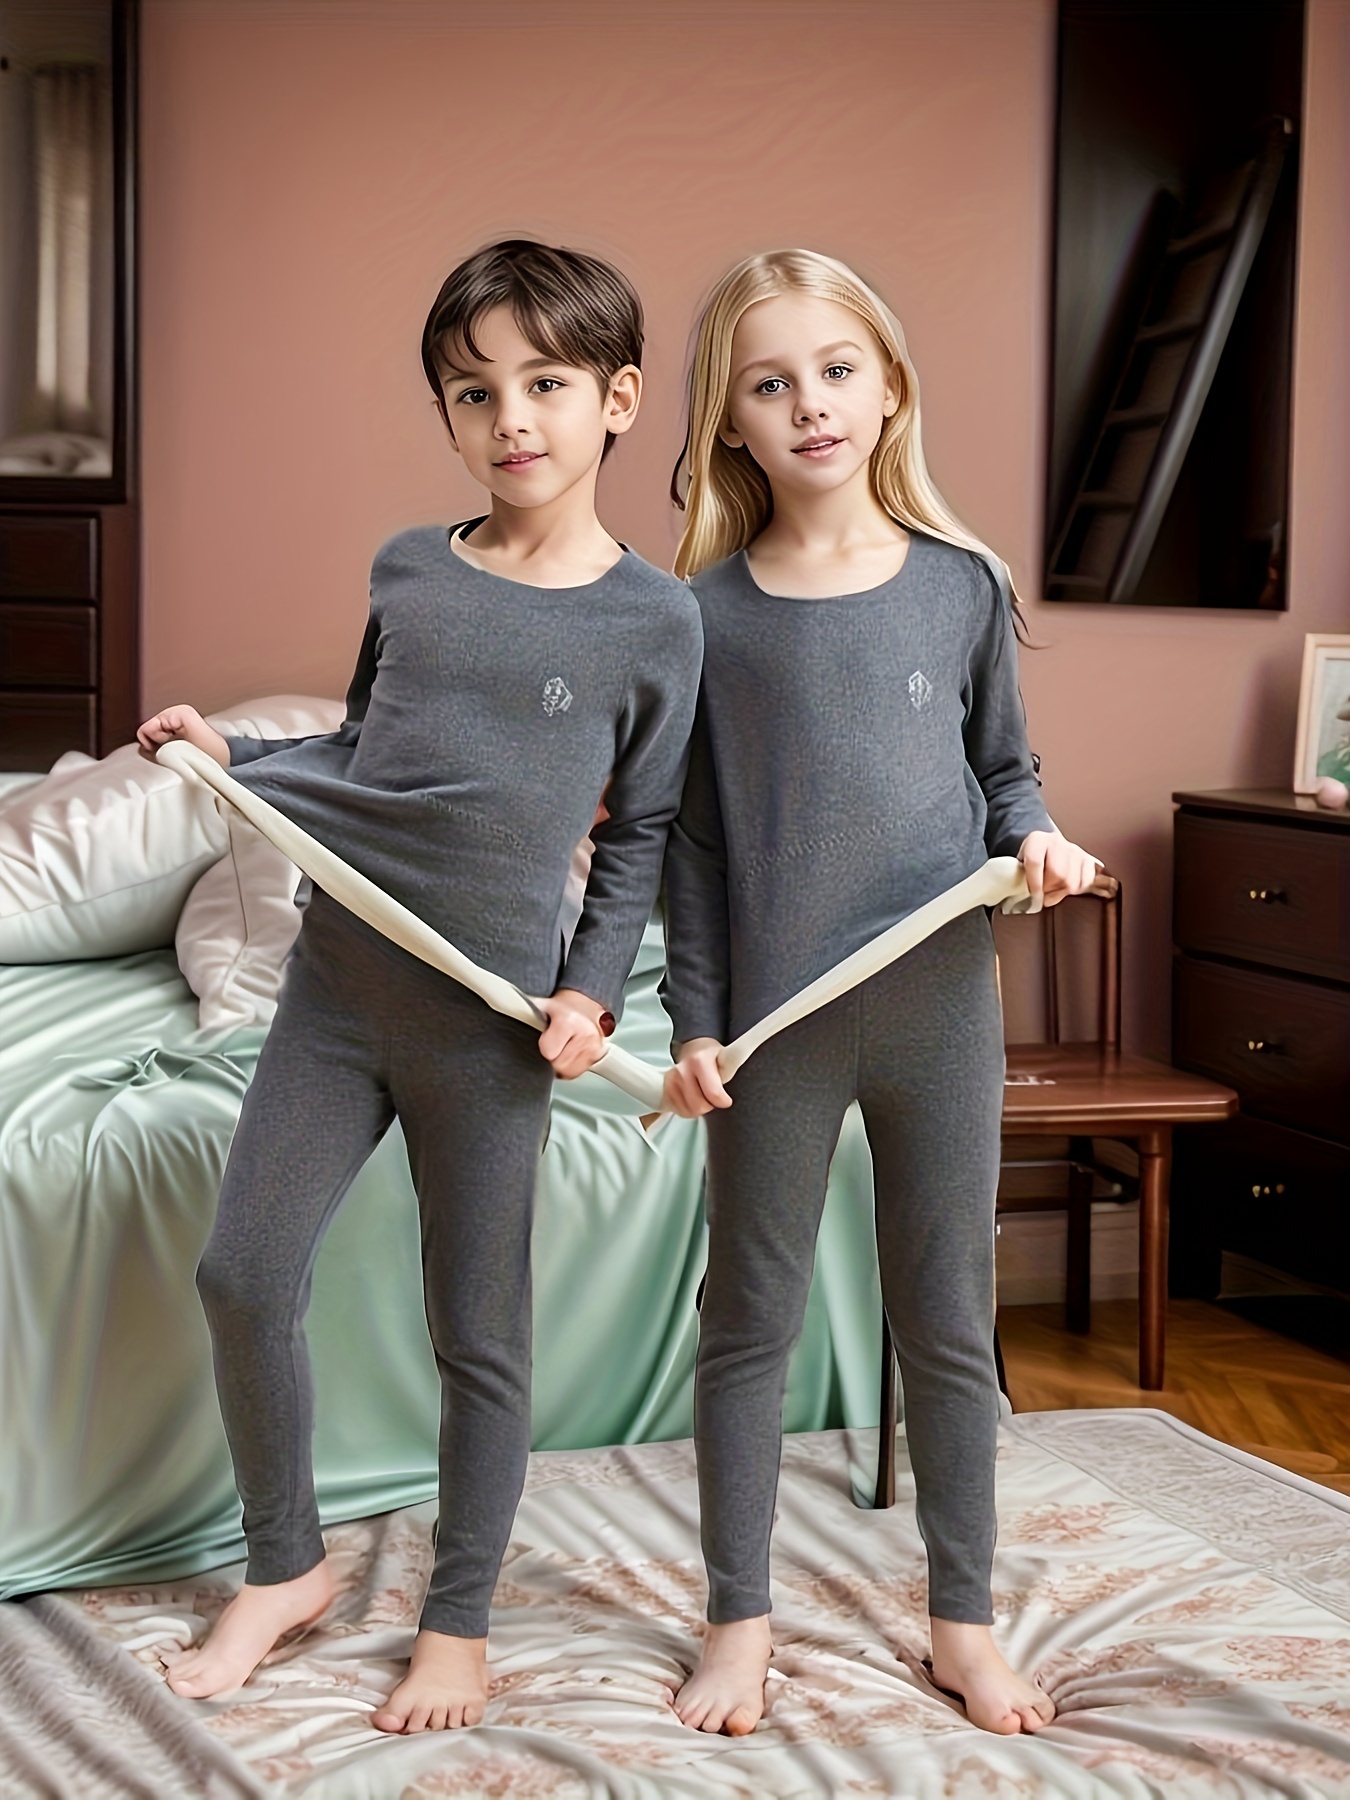 Soft Kids Underwear: The Best for Comfort and Flexibility